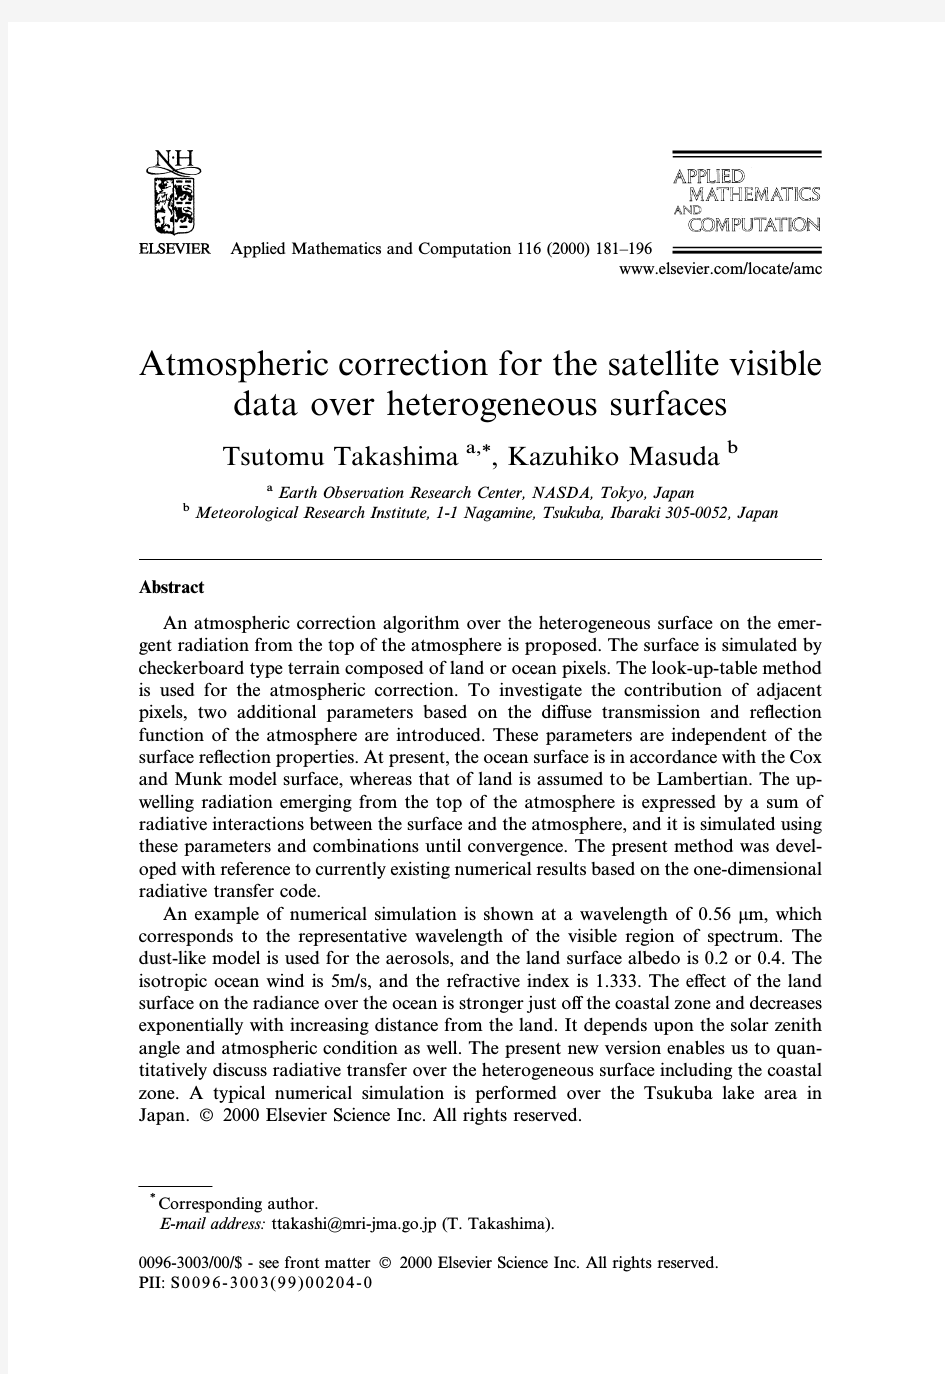 Atmospheric correction for the satellite visible data over heterogeneous surfaces